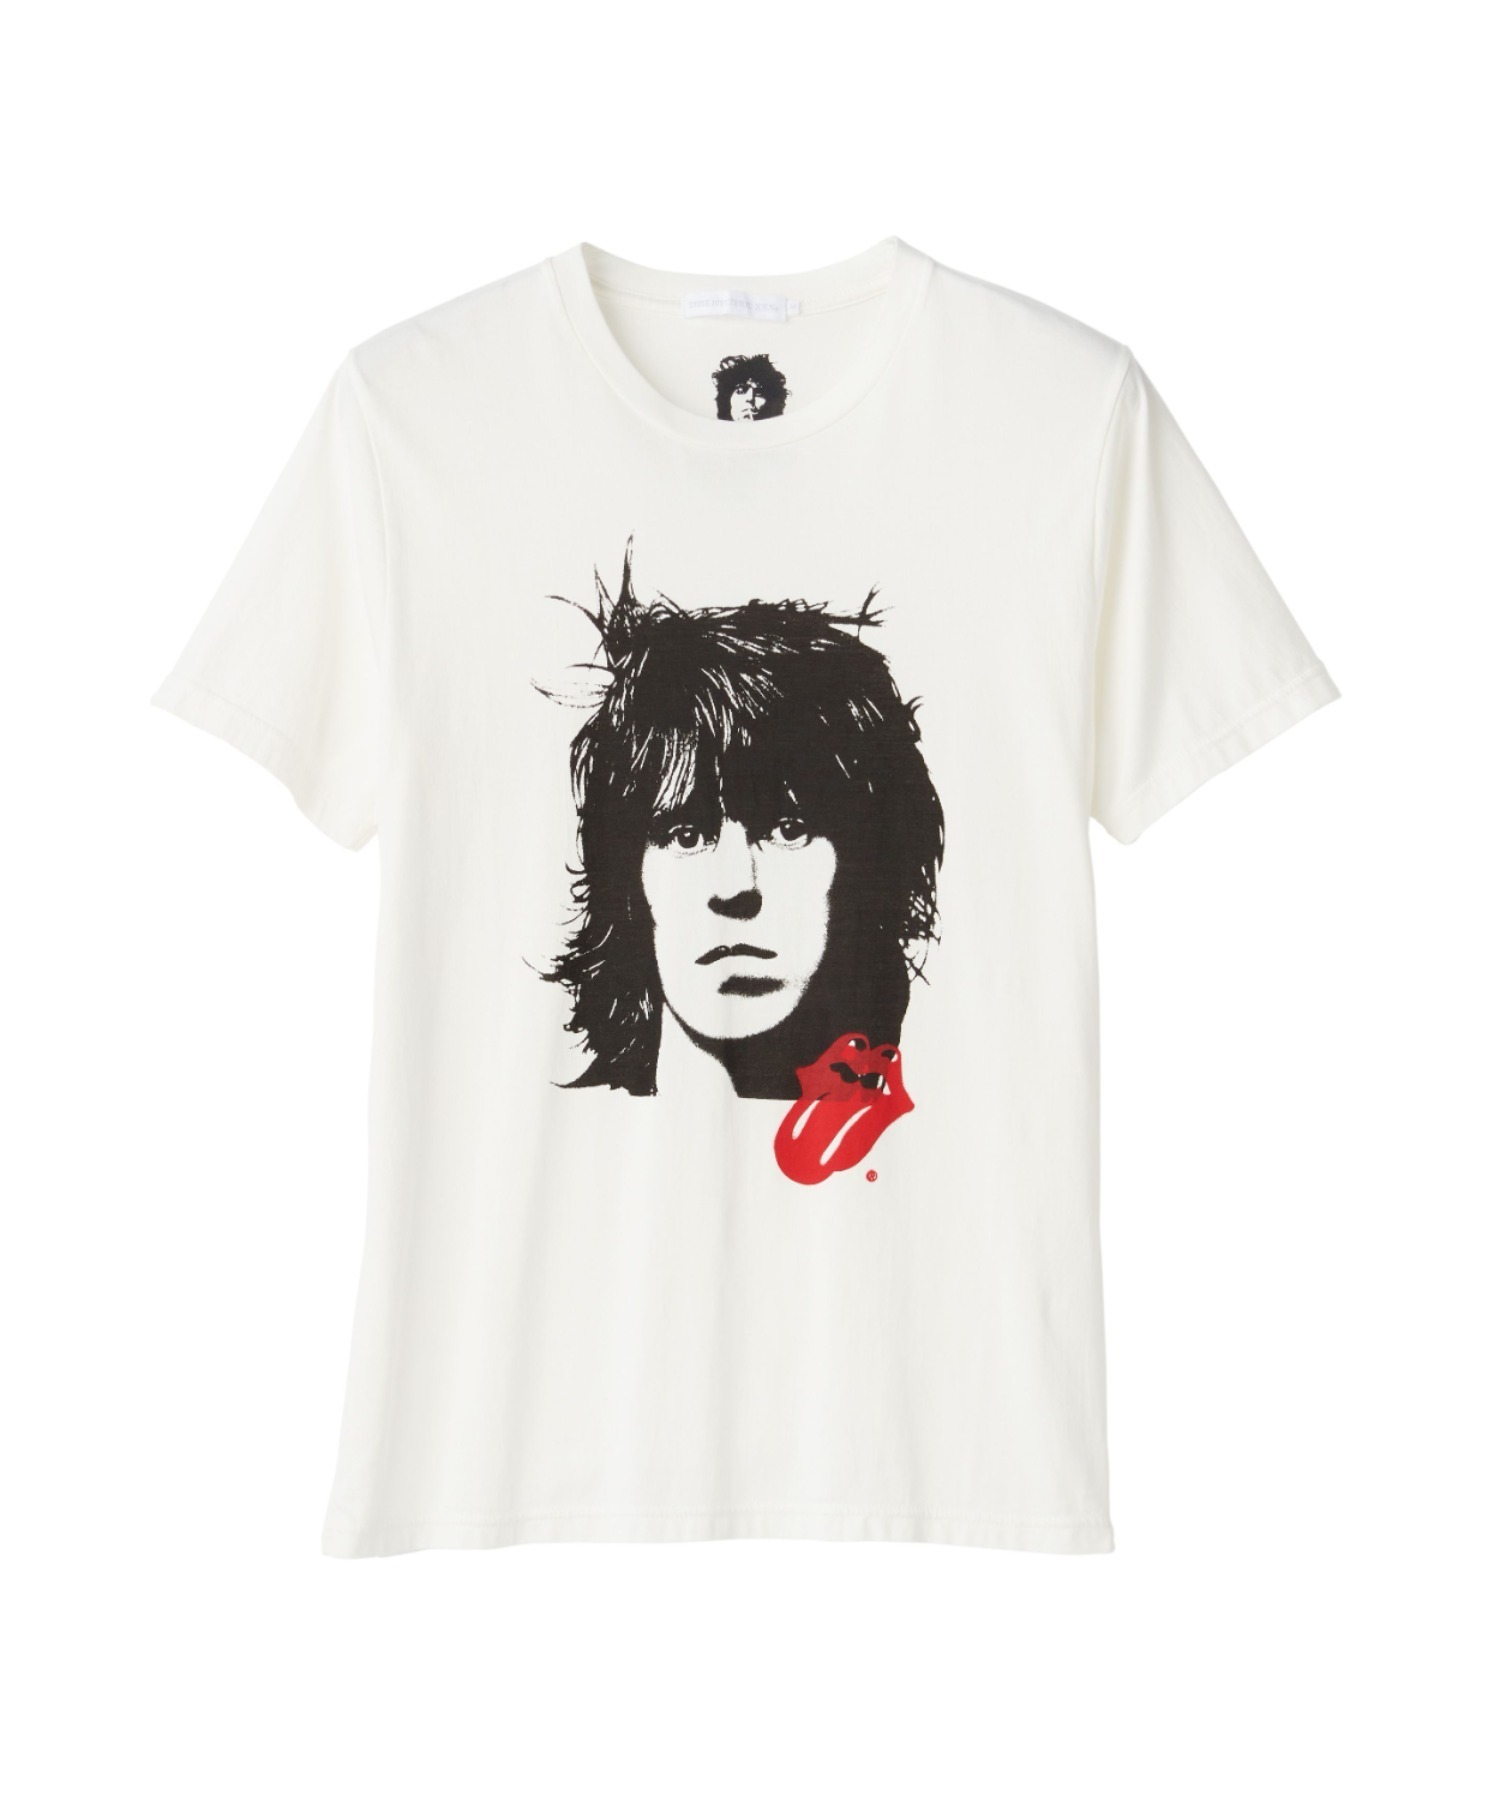 KEITH/KEITH 1972 Tシャツ